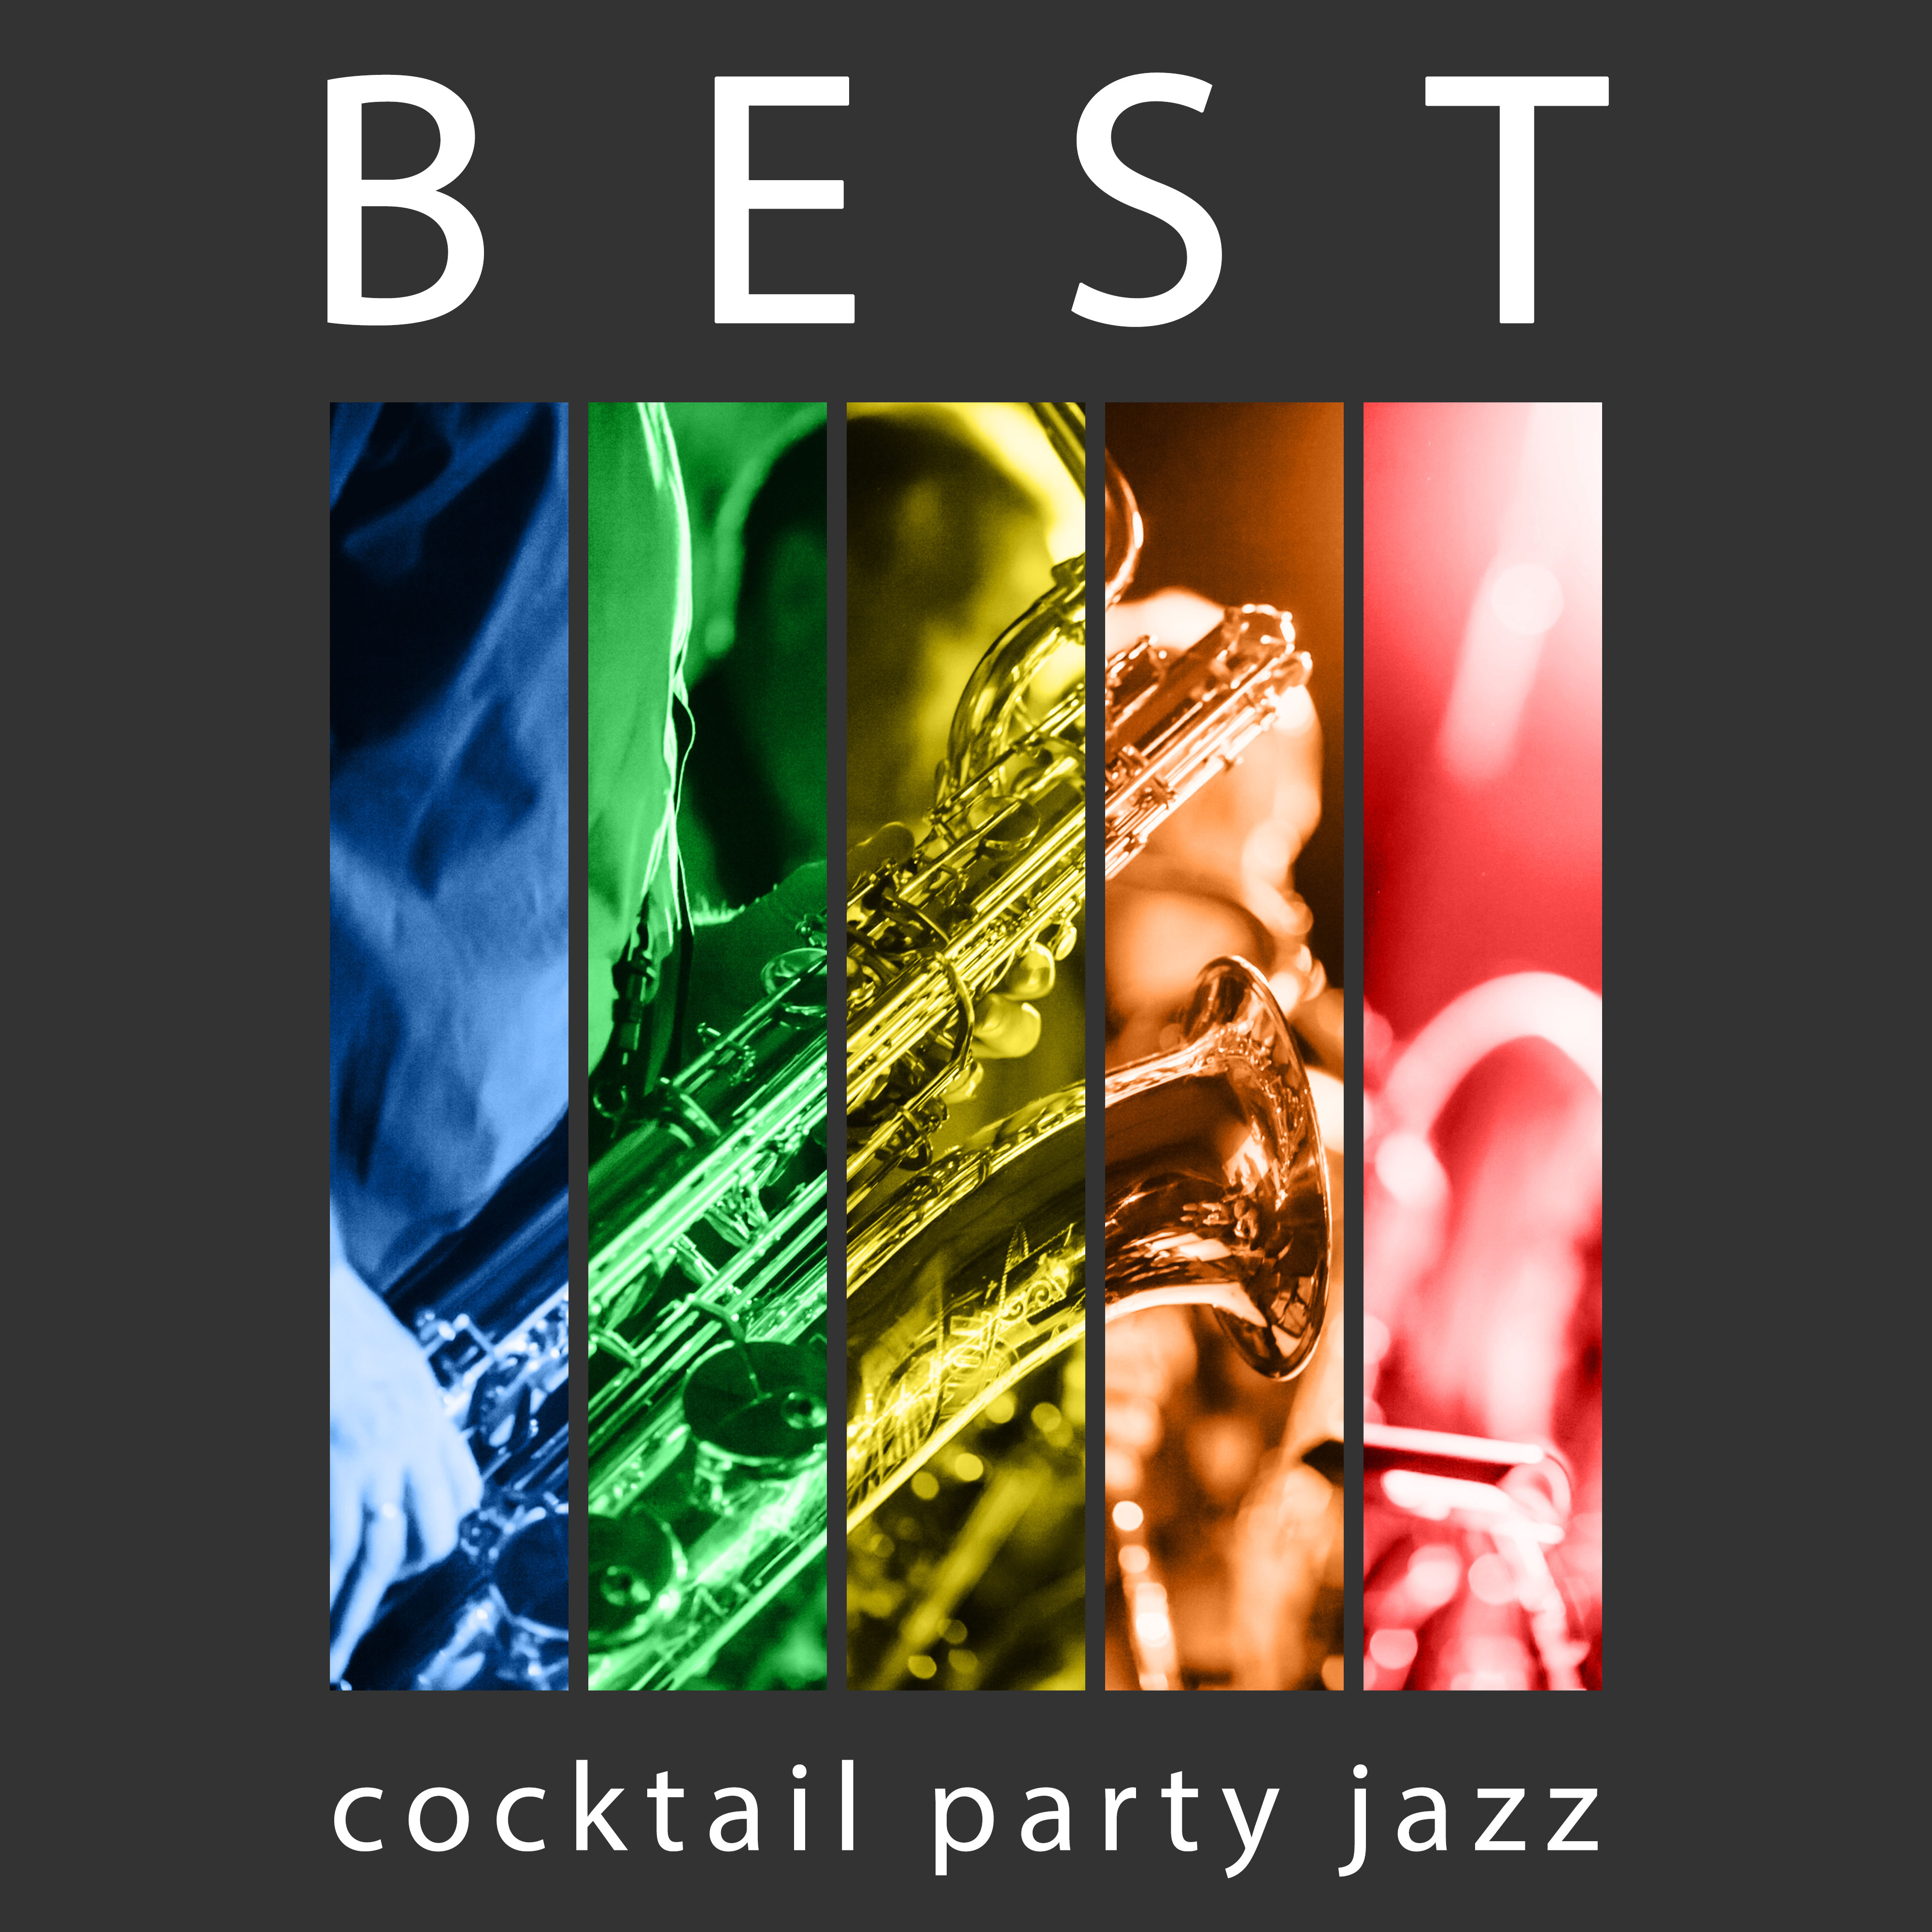 Best Cocktail Party Jazz - Coffee Time, Ambient Jazz, Smooth Bar